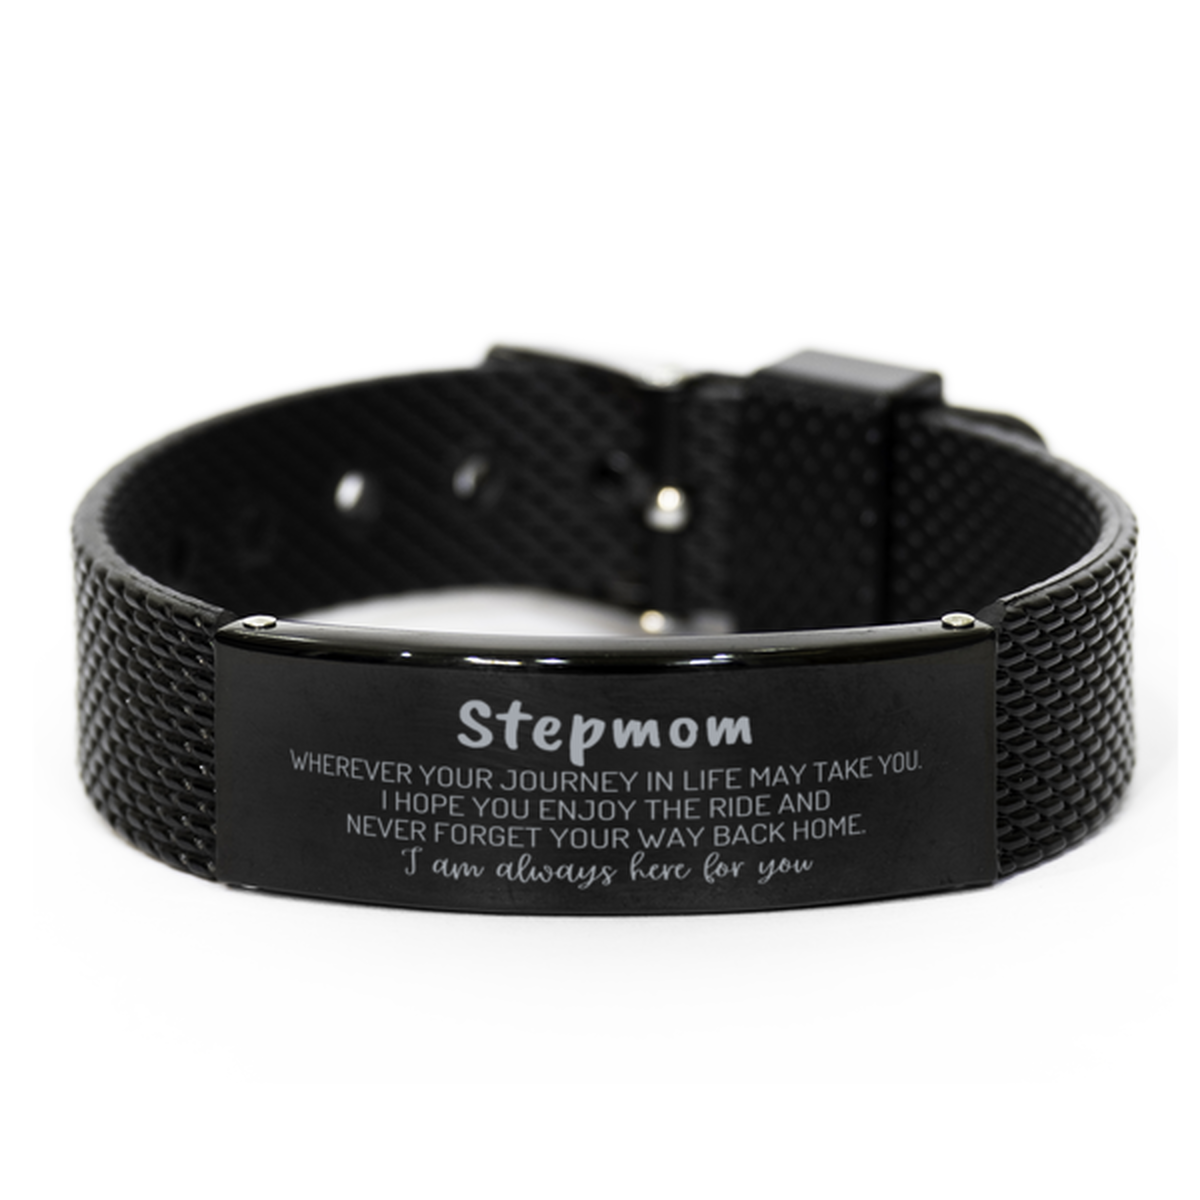 Stepmom wherever your journey in life may take you, I am always here for you Stepmom Black Shark Mesh Bracelet, Awesome Christmas Gifts For Stepmom, Stepmom Birthday Gifts for Men Women Family Loved One